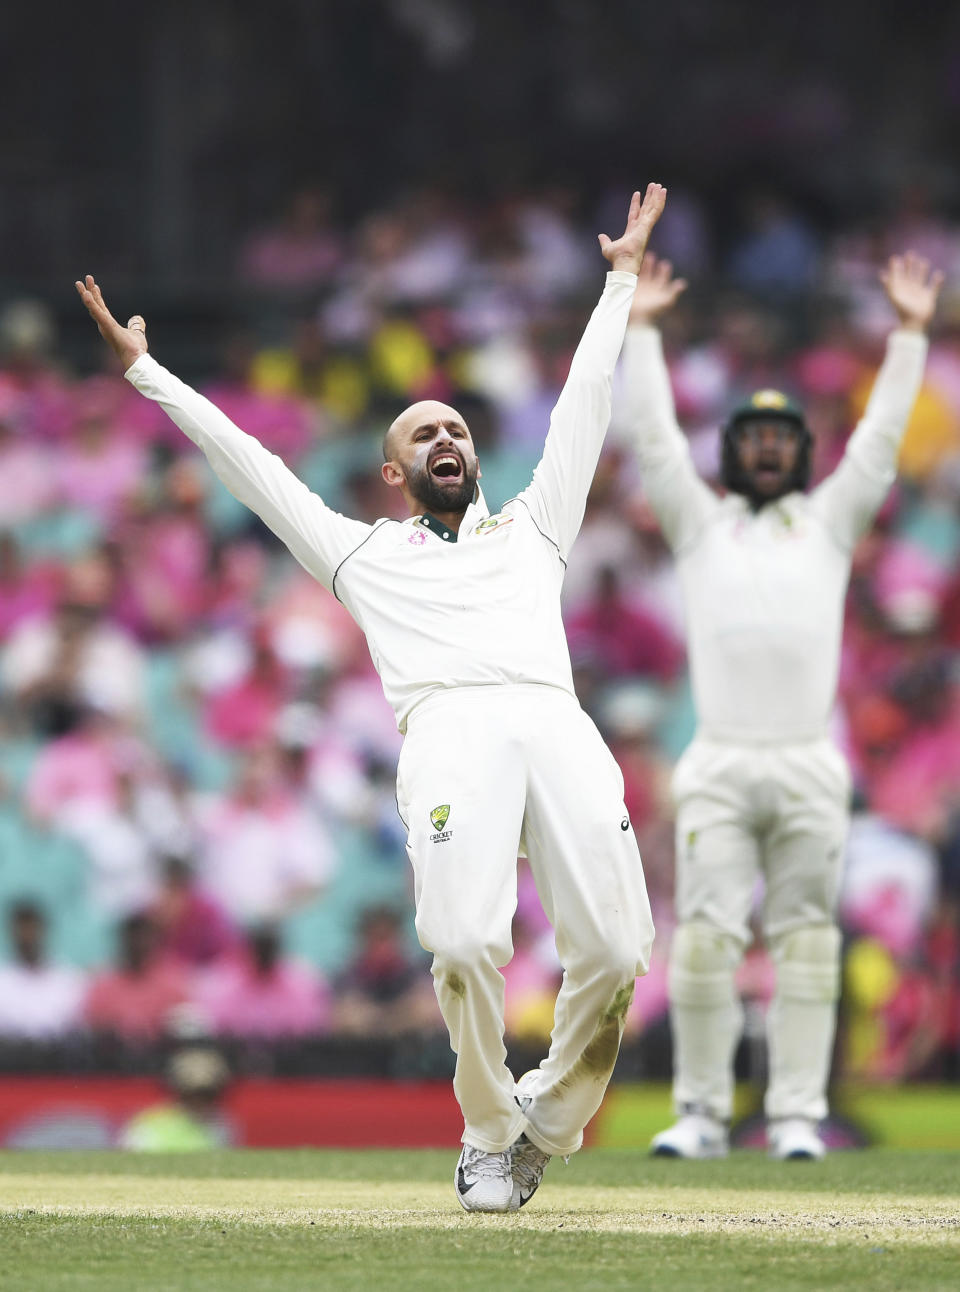 Australia's Nathan Lyon appeals unsuccessfully for an LBW decision on New Zealand's Glenn Phillips during play on day three of the third cricket test match between Australia and New Zealand at the Sydney Cricket Ground in Sydney Sunday, Jan. 5, 2020. (Andrew Cornaga/Photosport via AP)